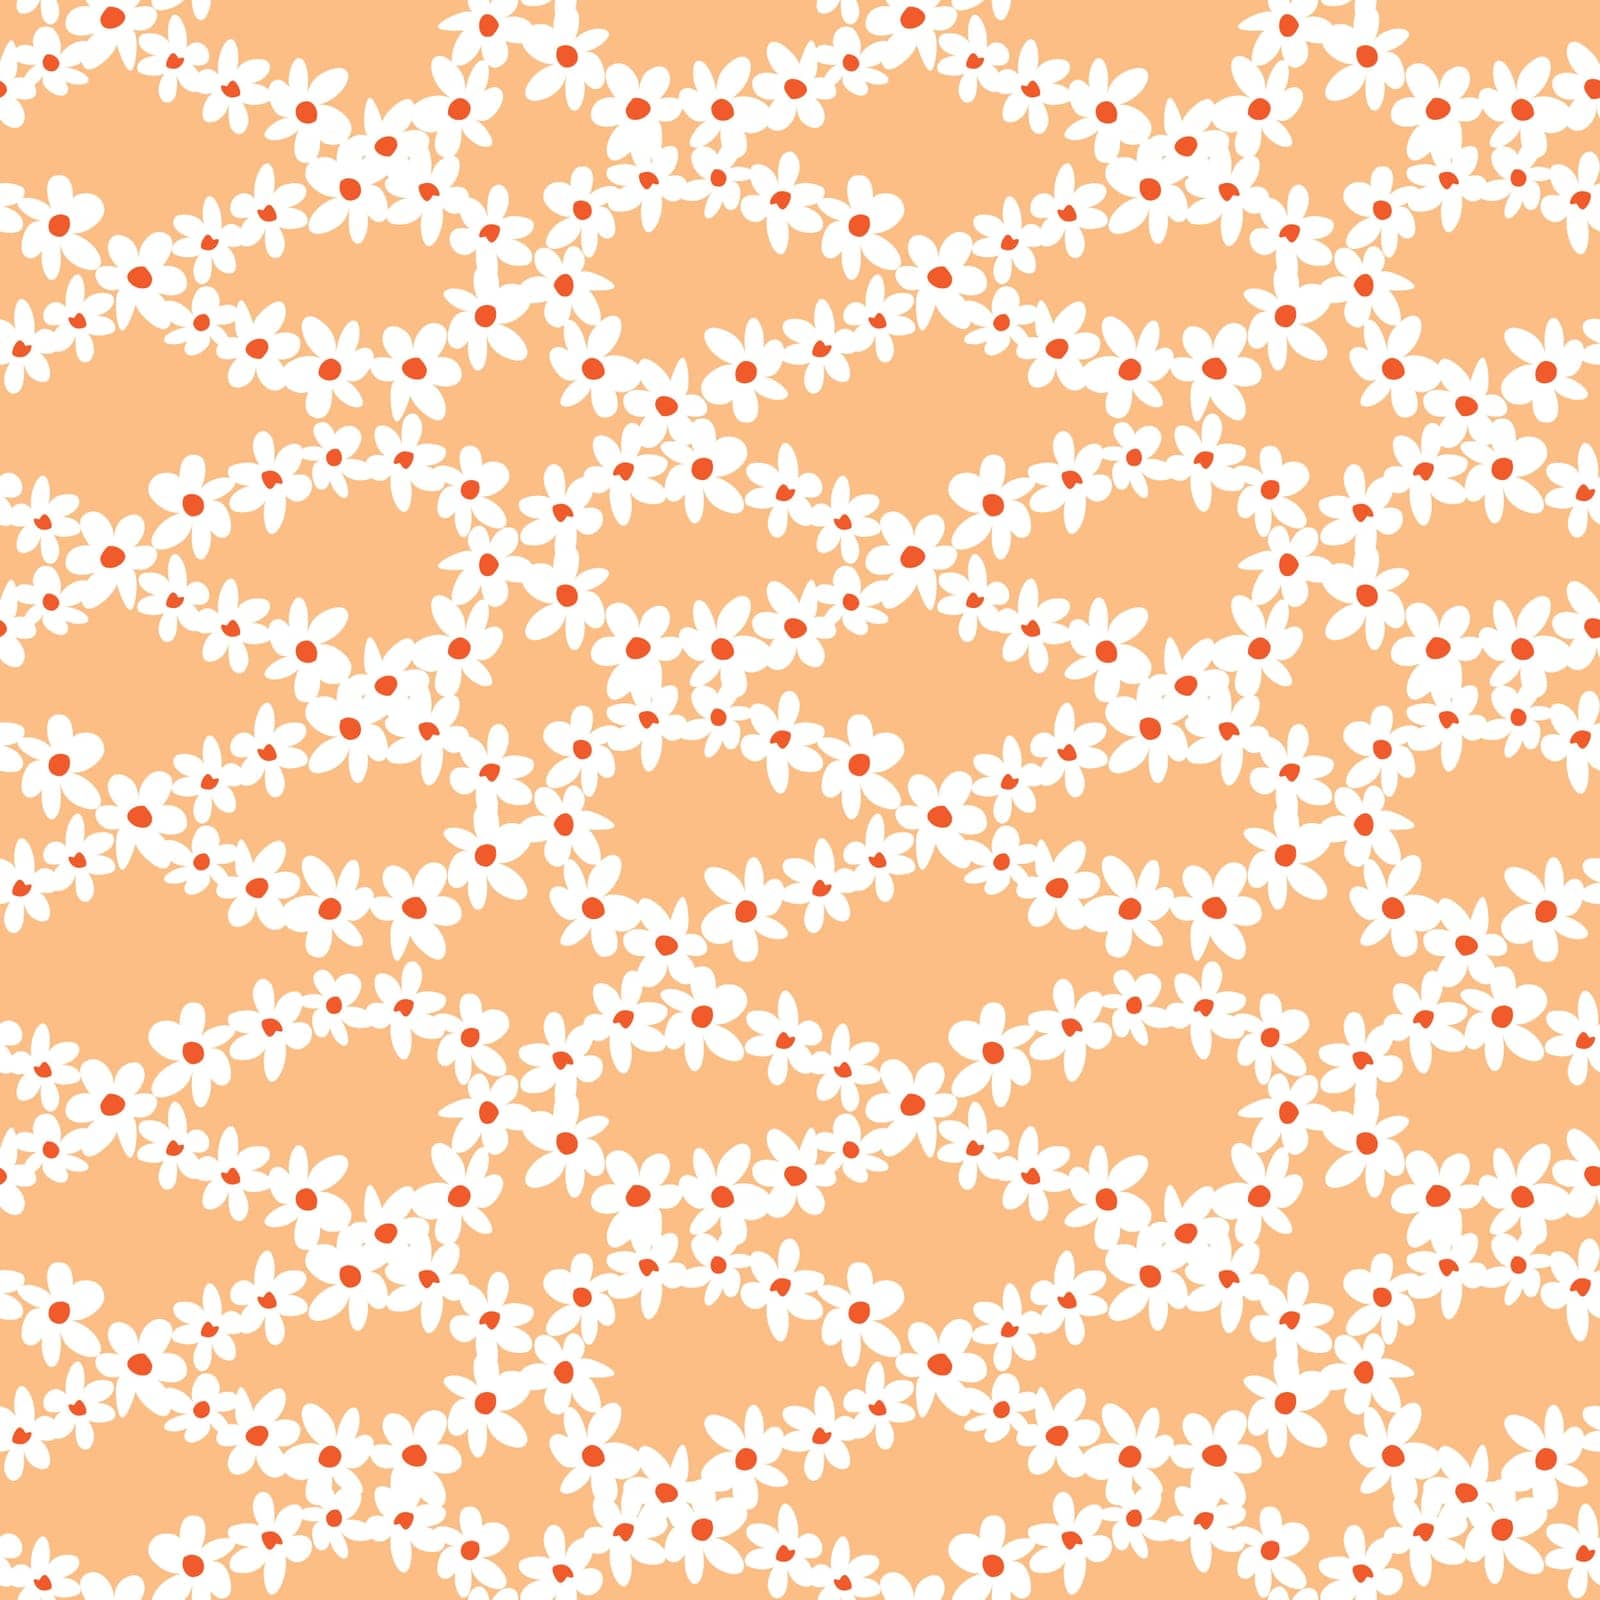 Vector orange fun daisy flowers infinity loop repeat pattern with orange center. Suitable for textile, gift wrap and wallpaper. by jamiesoondesign